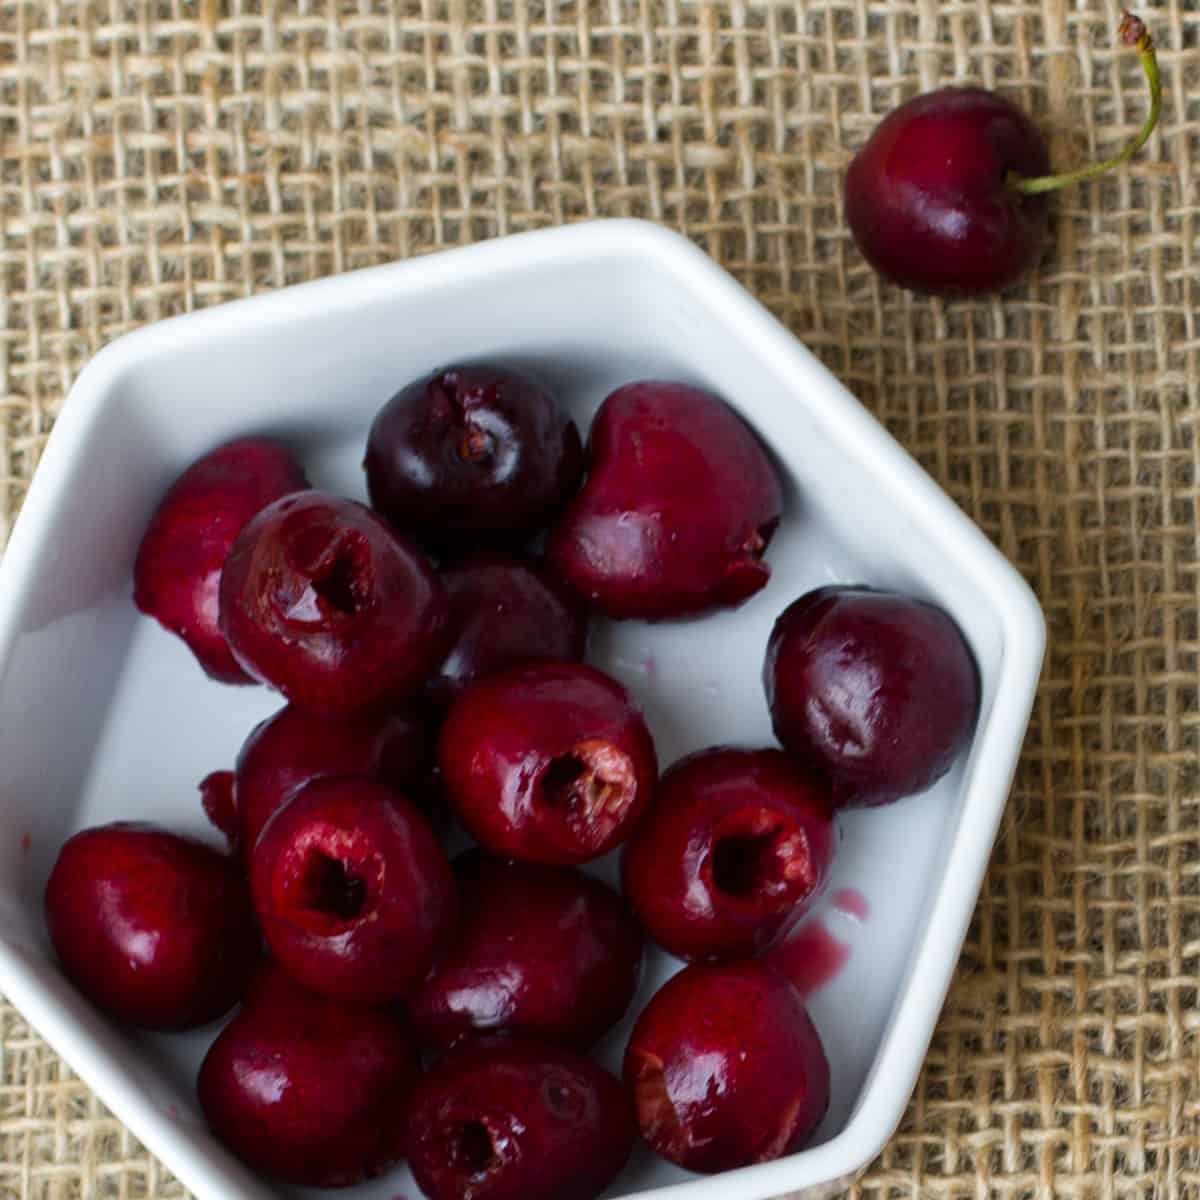 Pitted cherries in a white hexagon shaped bowl.